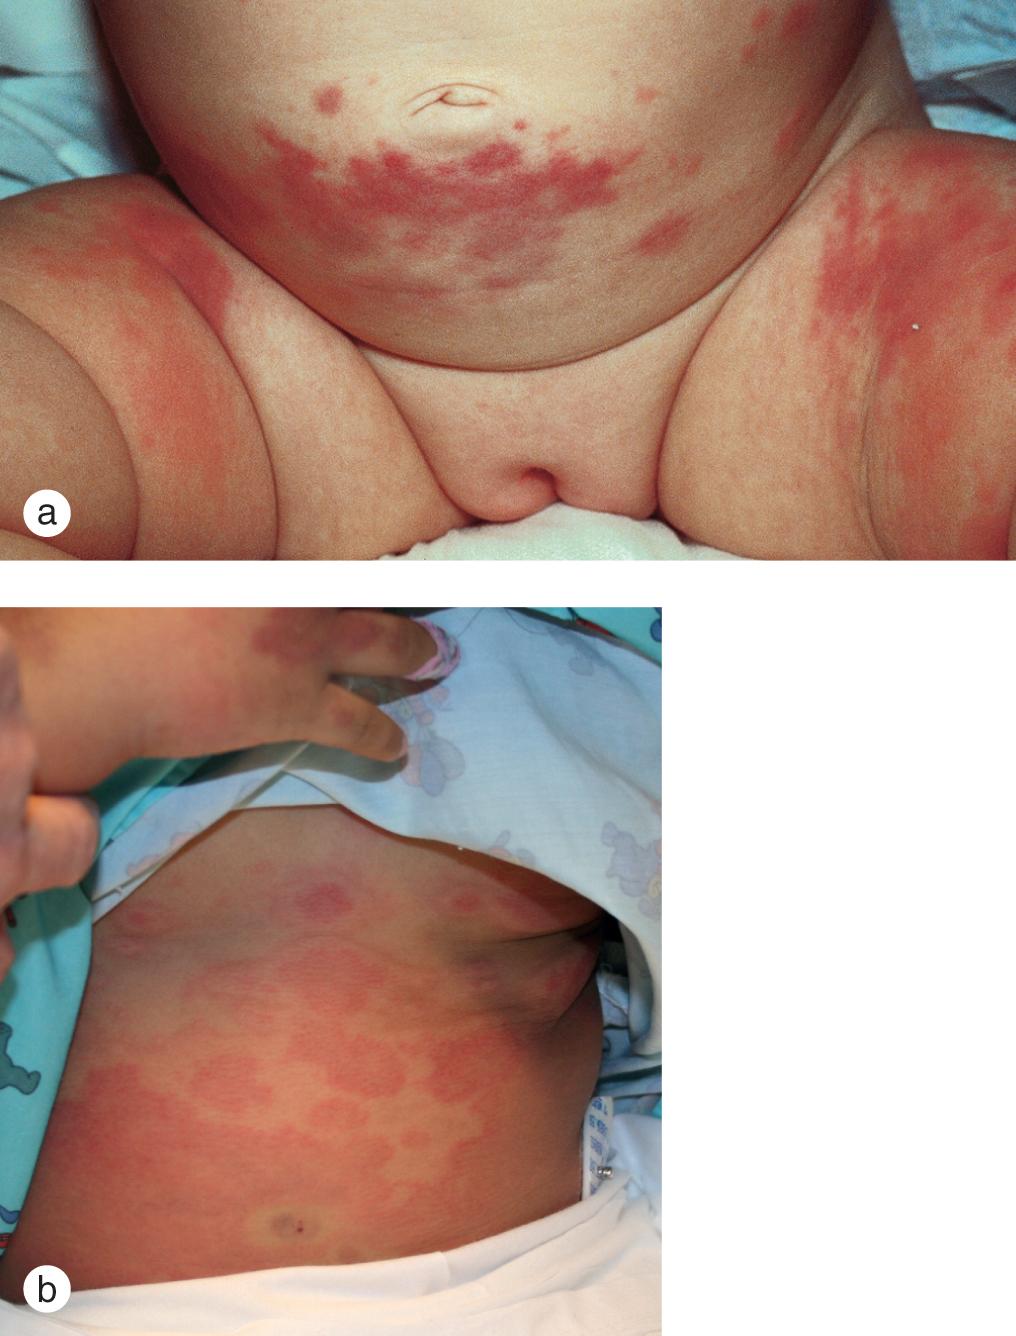 Fig. 7.7, (a) A 10-month-old girl developed urticaria on the lower trunk and thighs while being treated with cefaclor for an ear infection. Although the drug was stopped, the annular plaques progressed and became purpuric centrally. The rash was accompanied by arthralgias, joint swelling, and fever consistent with a serum sickness picture. (b) Generalized migratory itchy papules and plaques (urticaria multiforme) developed in this 4-year-old girl with a viral gastroenteritis.